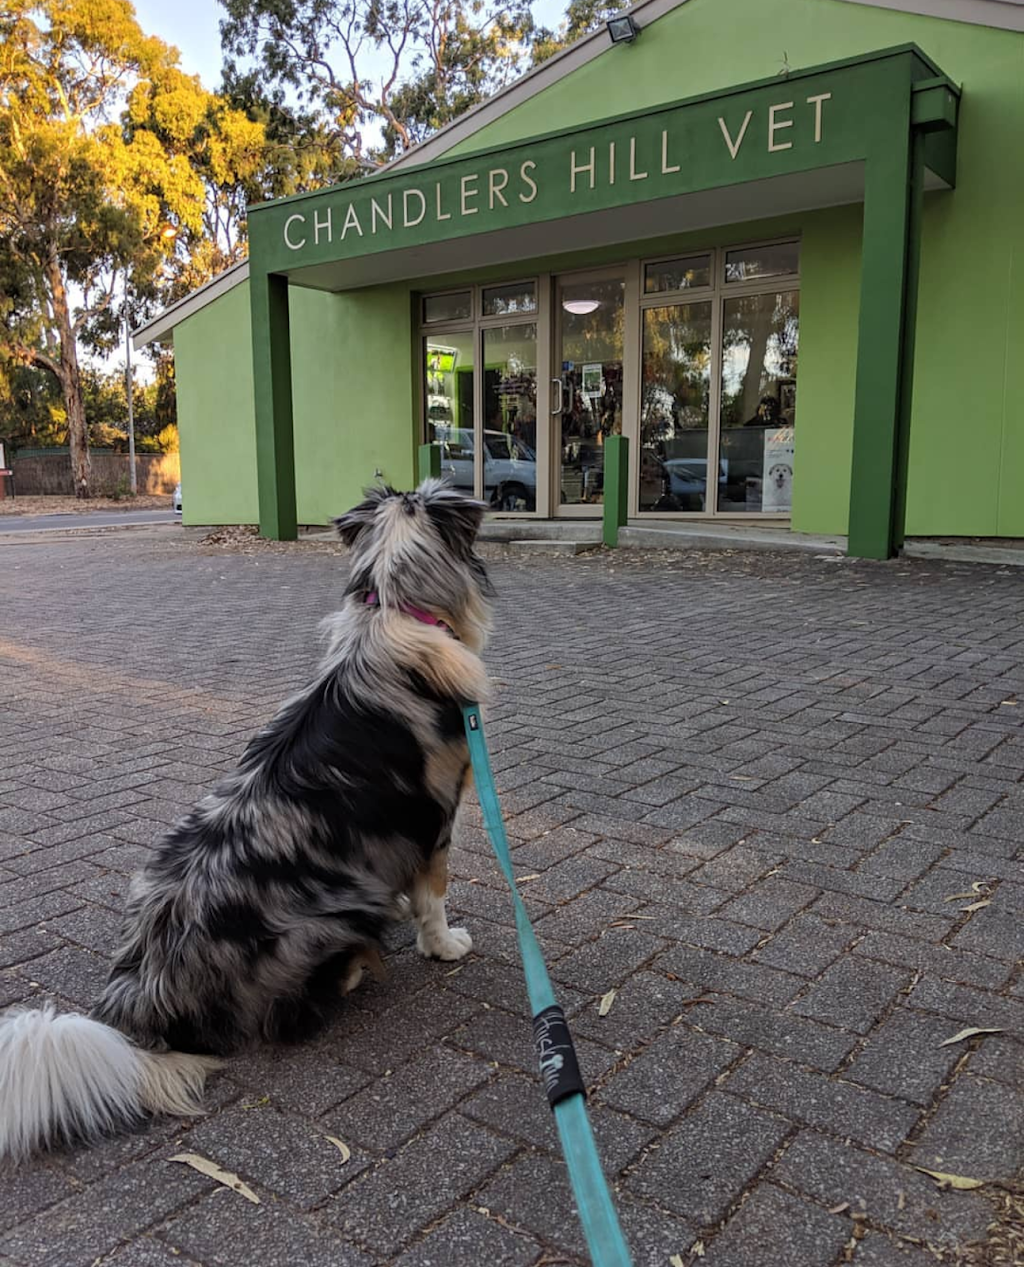 Chandlers Hill Vet | veterinary care | 190 Chandlers Hill Rd, Happy Valley SA 5159, Australia | 0883222090 OR +61 8 8322 2090